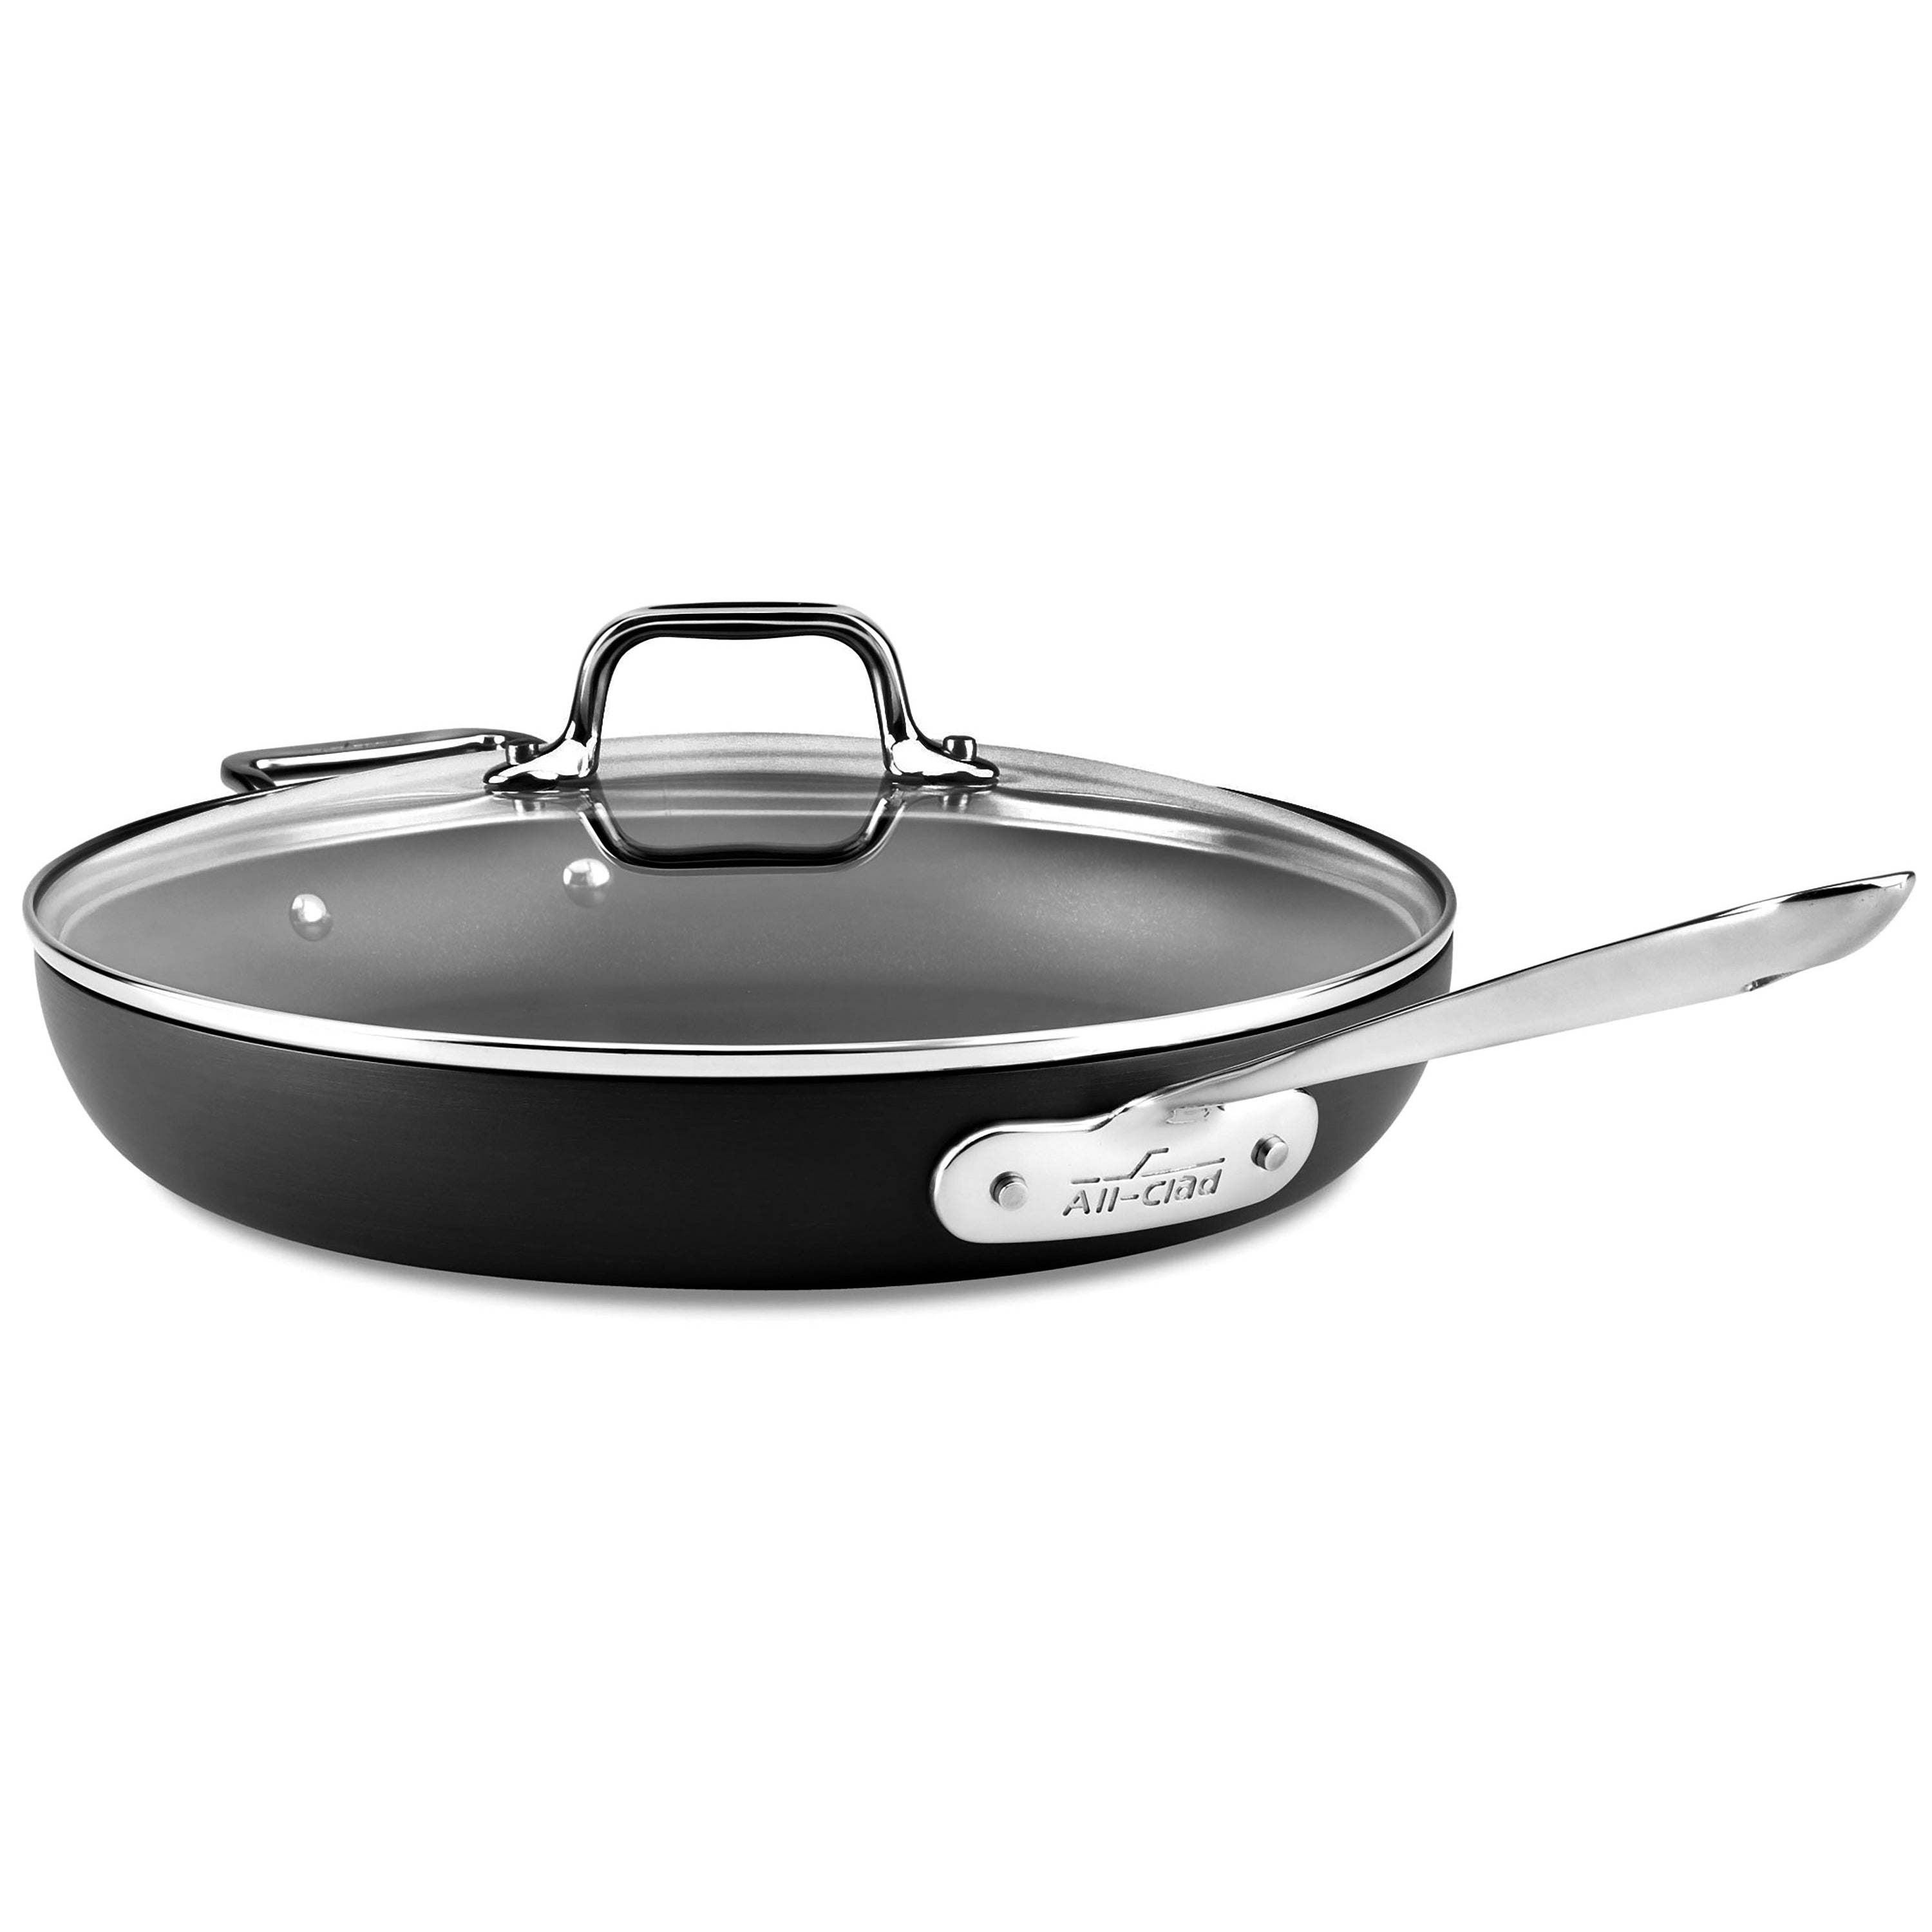  All-Clad HA1 Hard Anodized Nonstick Fry Pan 12 Inch